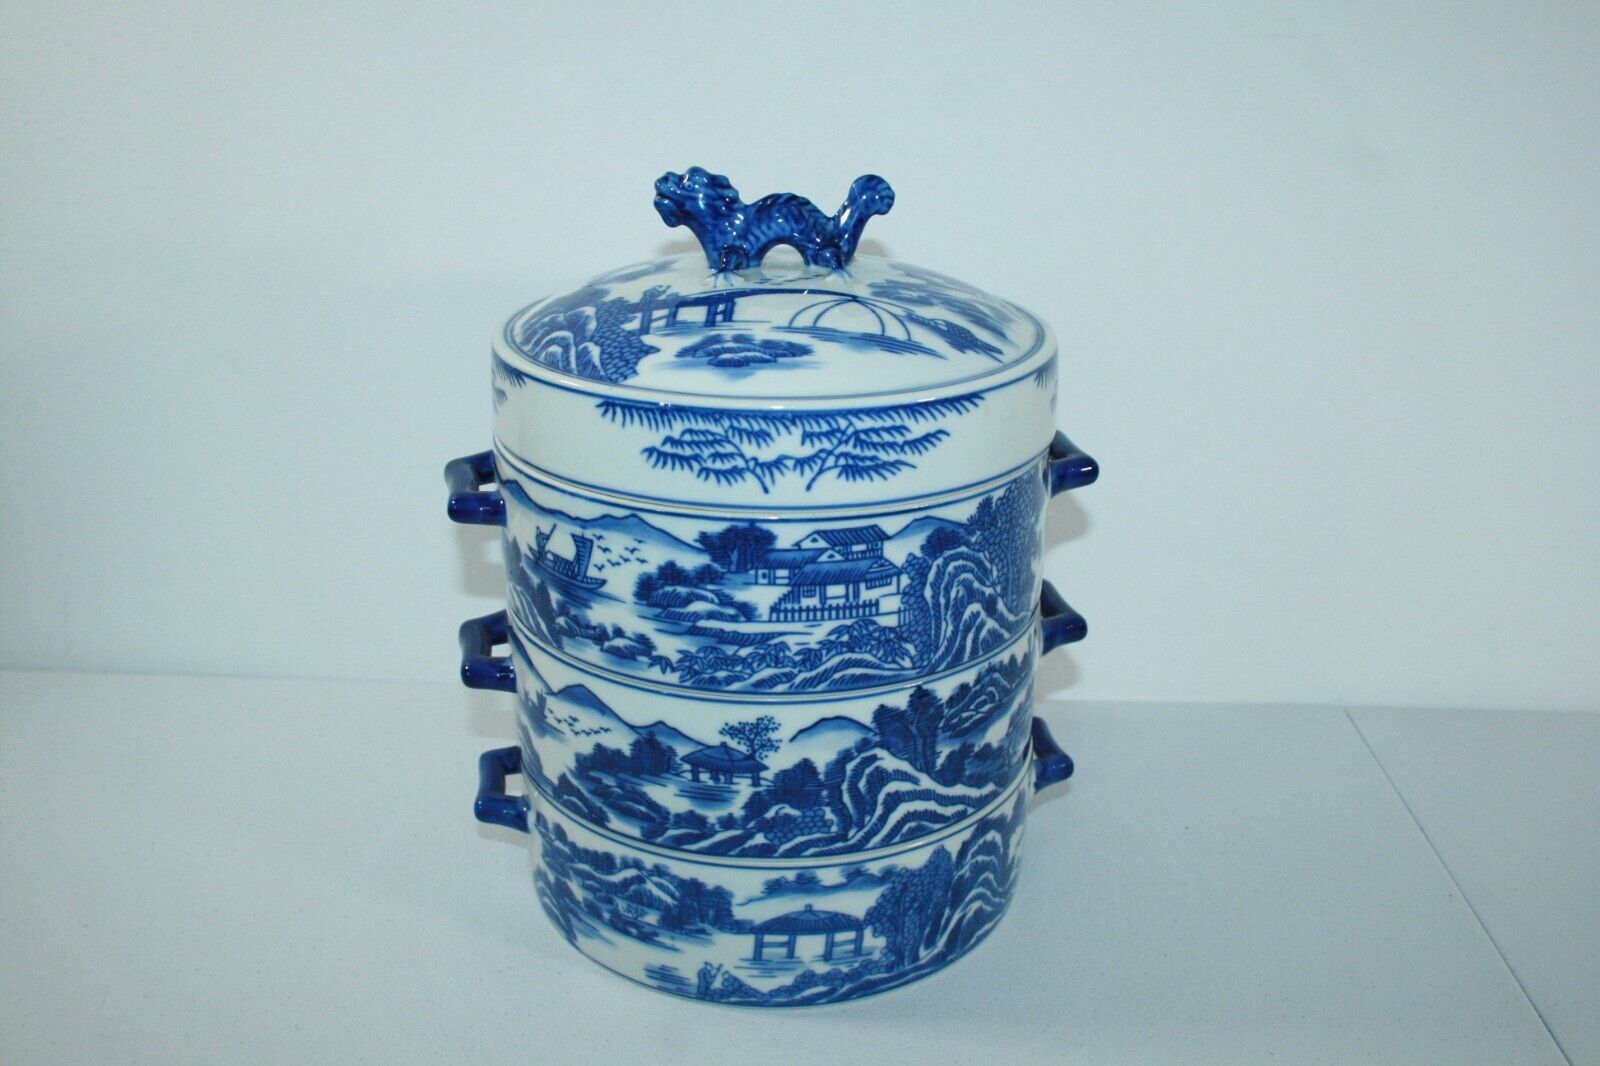 RARE Blue Willow Bombay Porcelain Lunch Box Chinese Dragon Stacking Dish